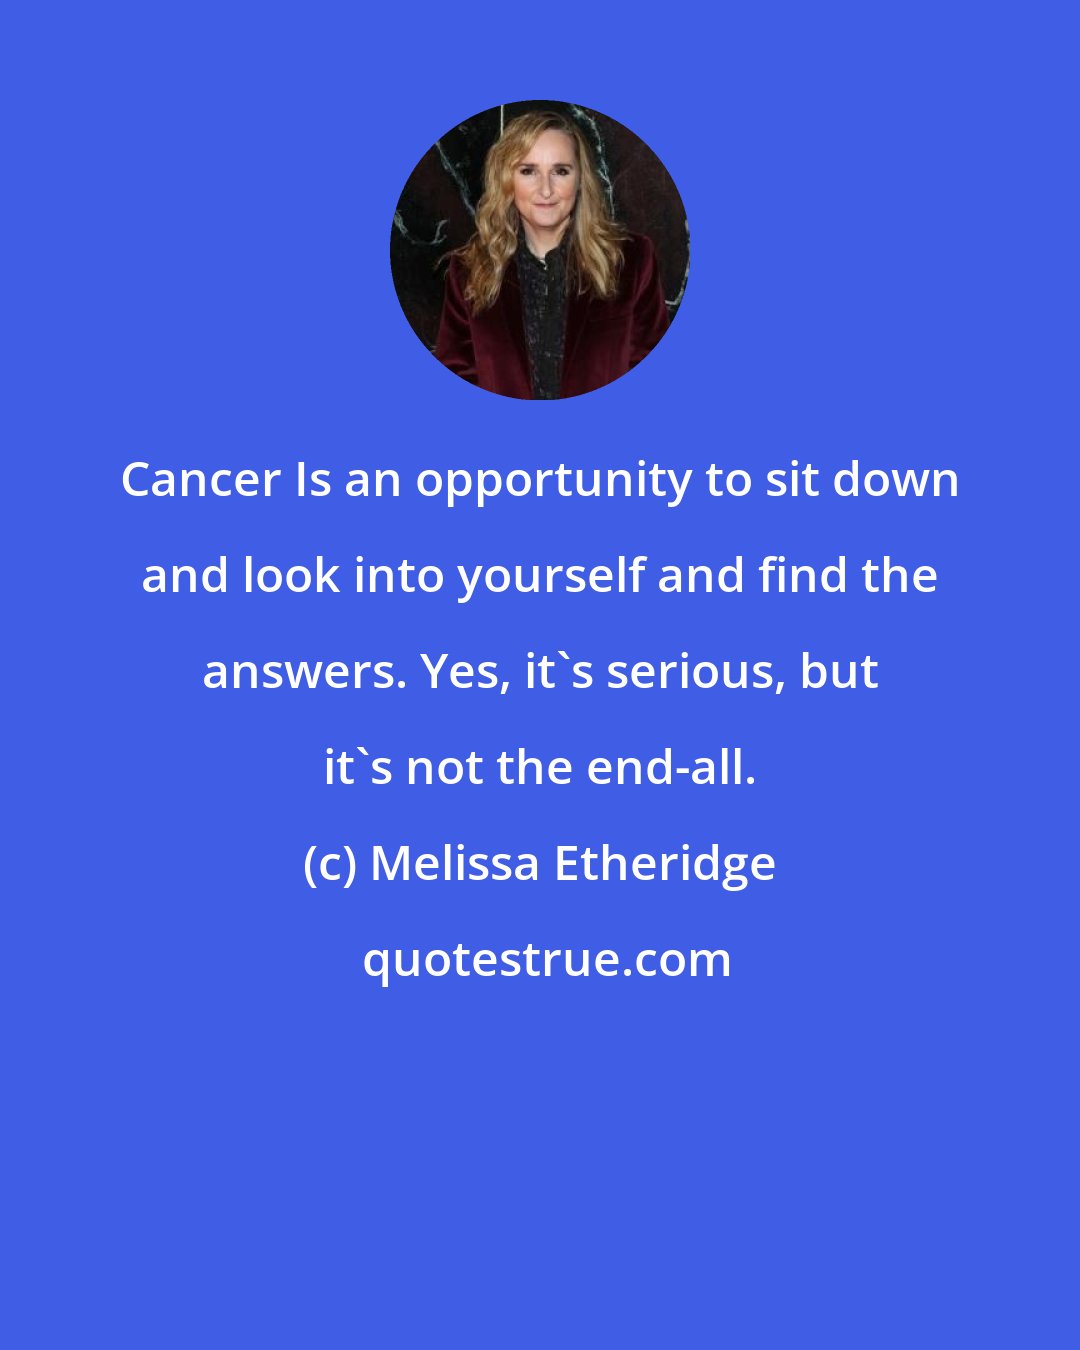 Melissa Etheridge: Cancer Is an opportunity to sit down and look into yourself and find the answers. Yes, it's serious, but it's not the end-all.